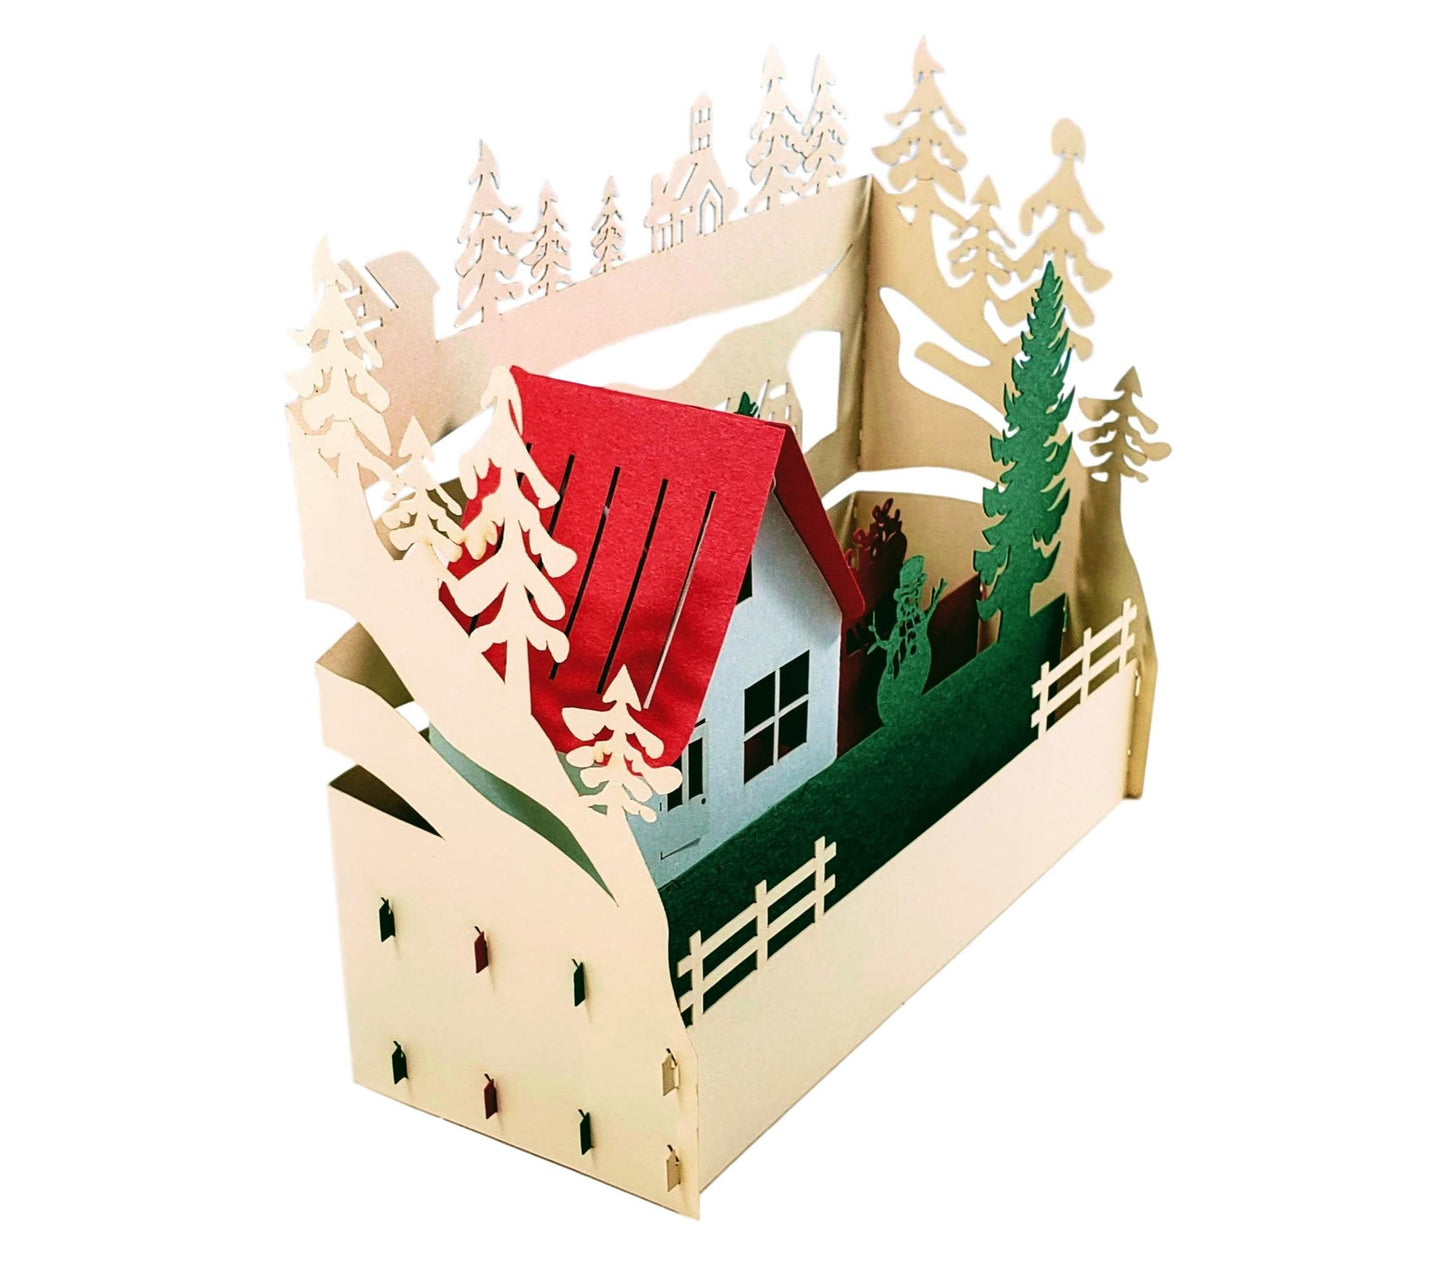 Country Cottage 3D Pop Up Centerpiece - Centerpiece - Christmas - iGifts And Cards